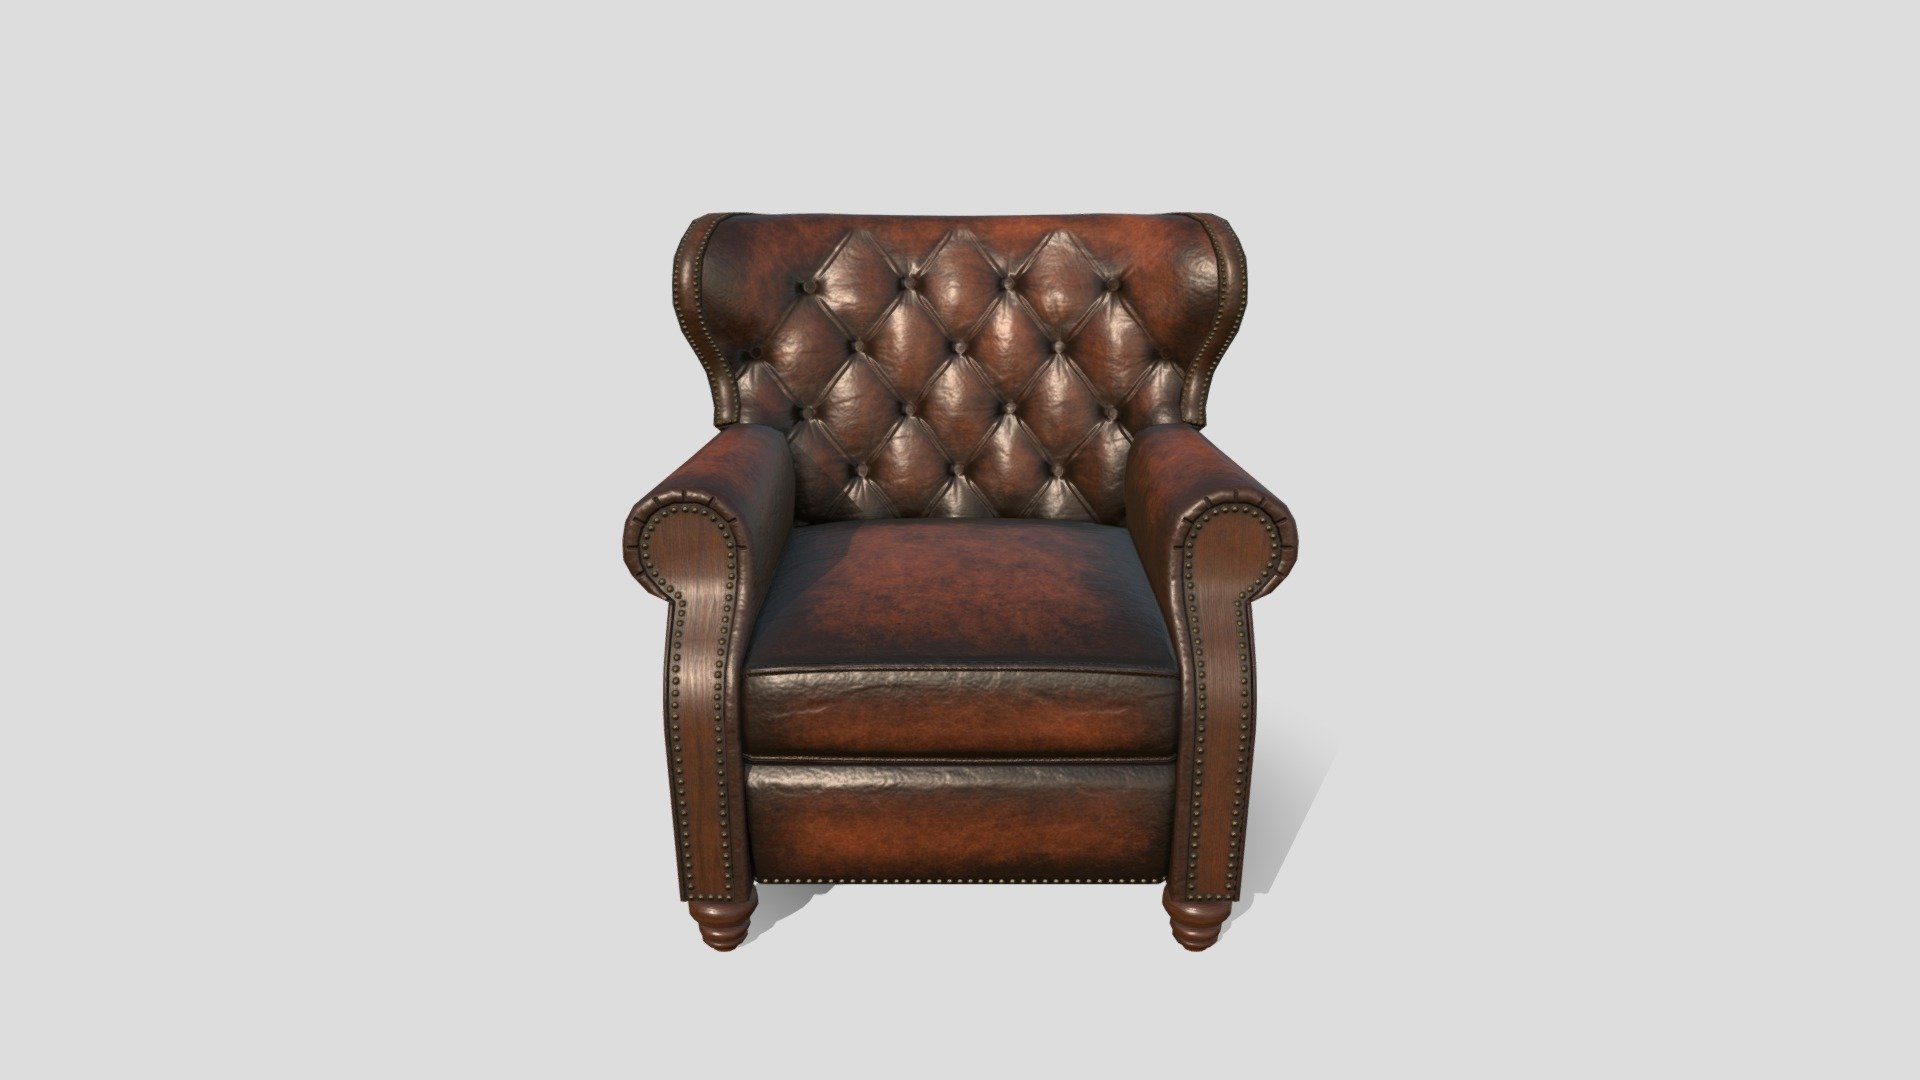 Low-poly model of a beautiful leather armchair 3d model